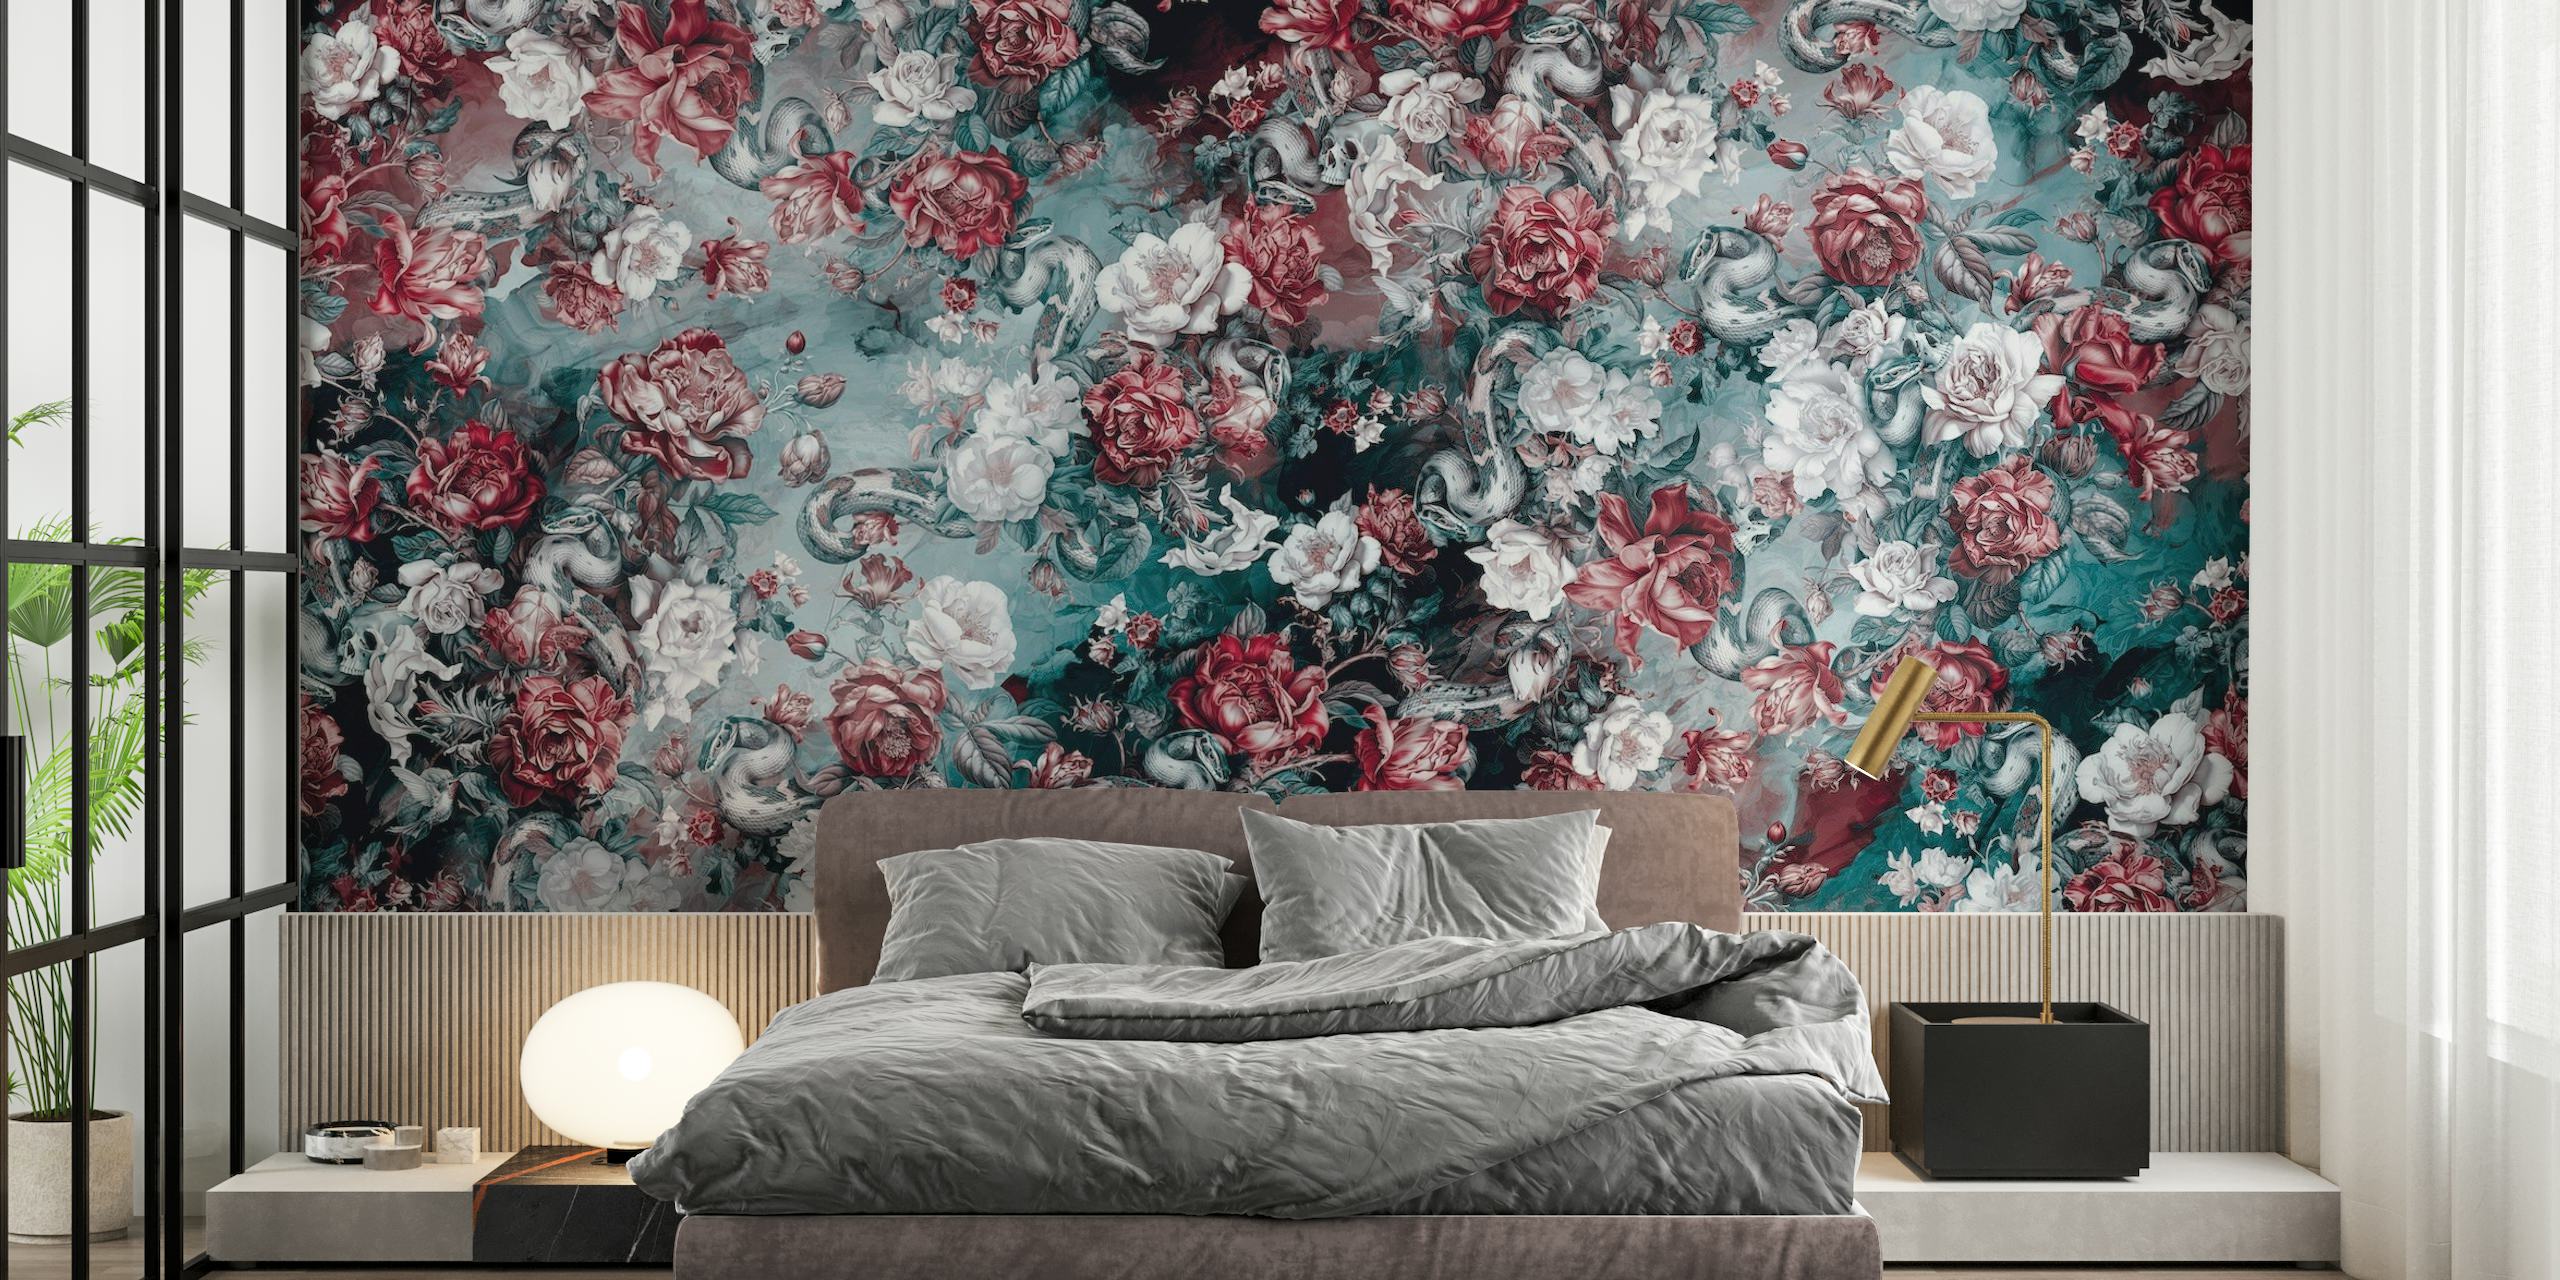 Skull and serpent-infused rose pattern wall mural from happywall.com